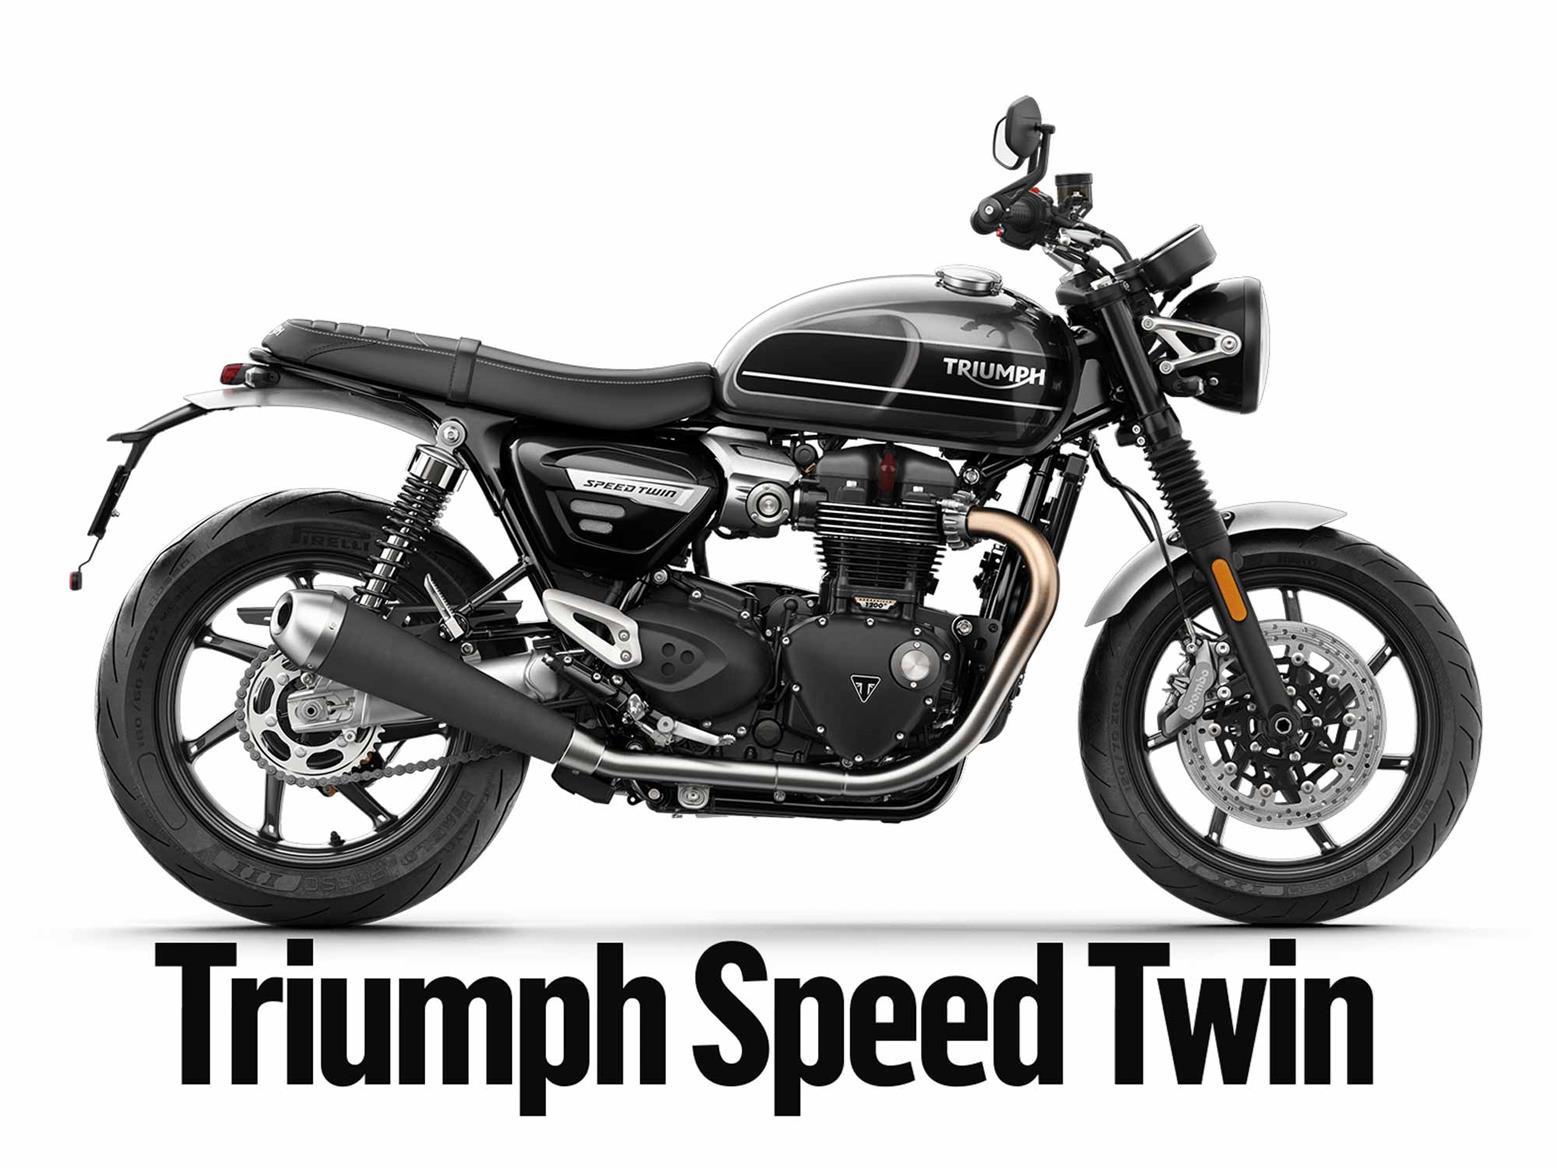 Read MCN's detailed Triumph Speed Twin long-term test review here